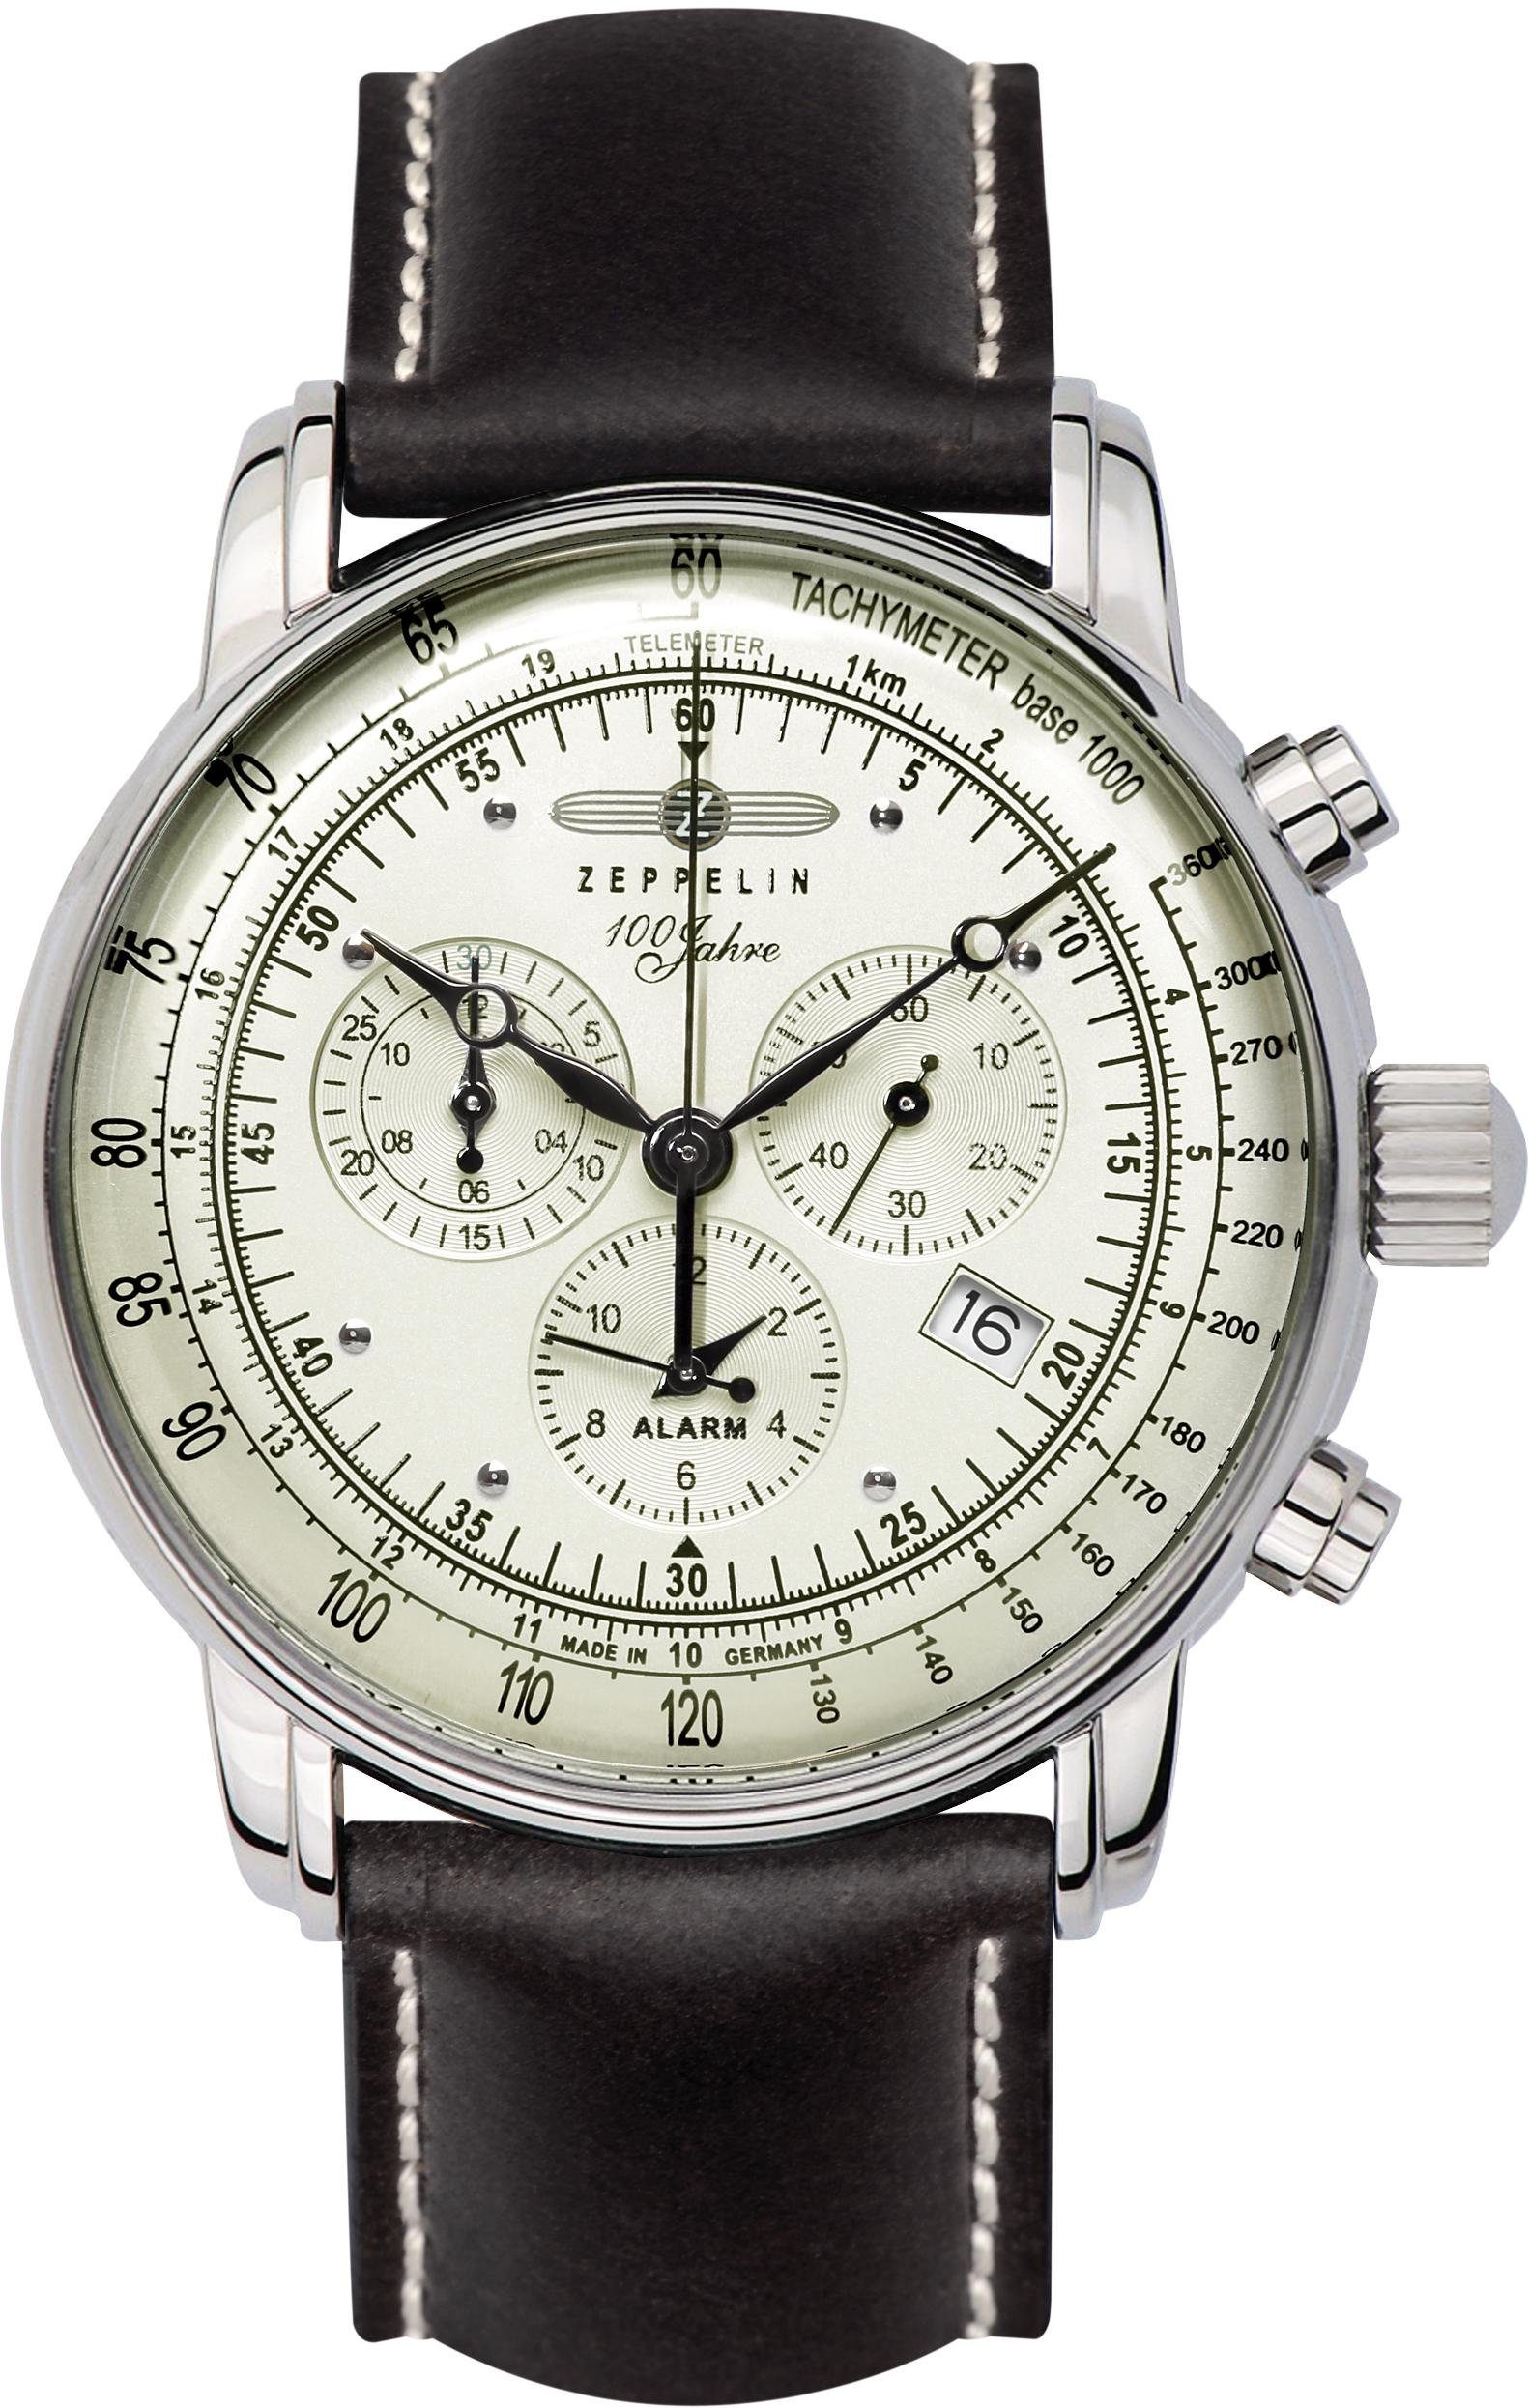 ZEPPELIN Chronograph in 8680-3, 100 Zeppelin, Jahre Germany Made